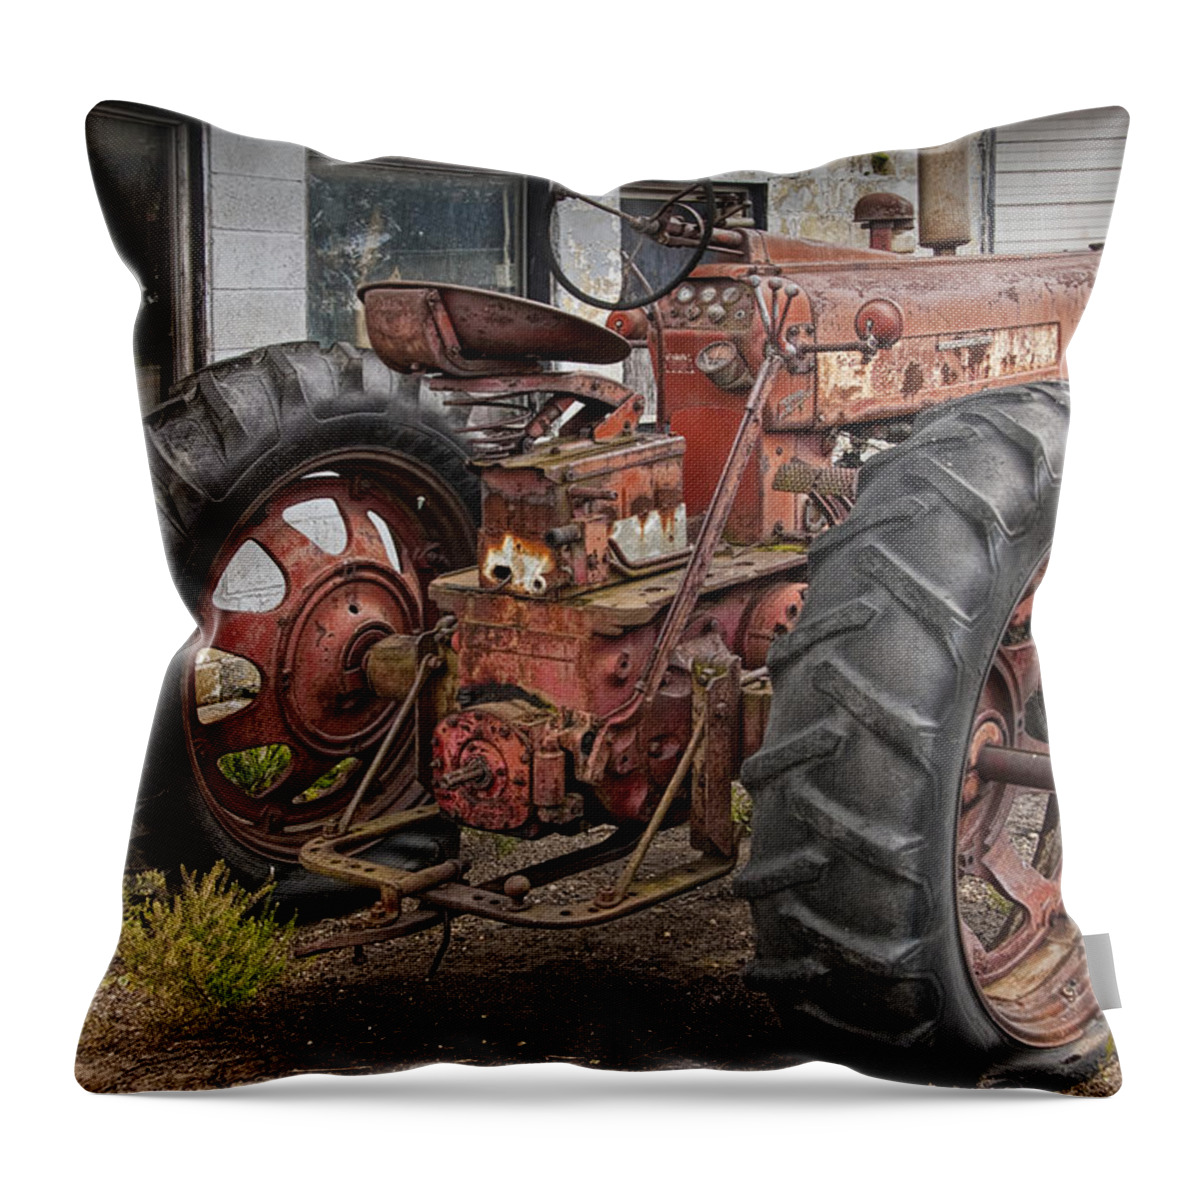 Art Throw Pillow featuring the photograph Abandoned Farmall Tractor by Randall Nyhof